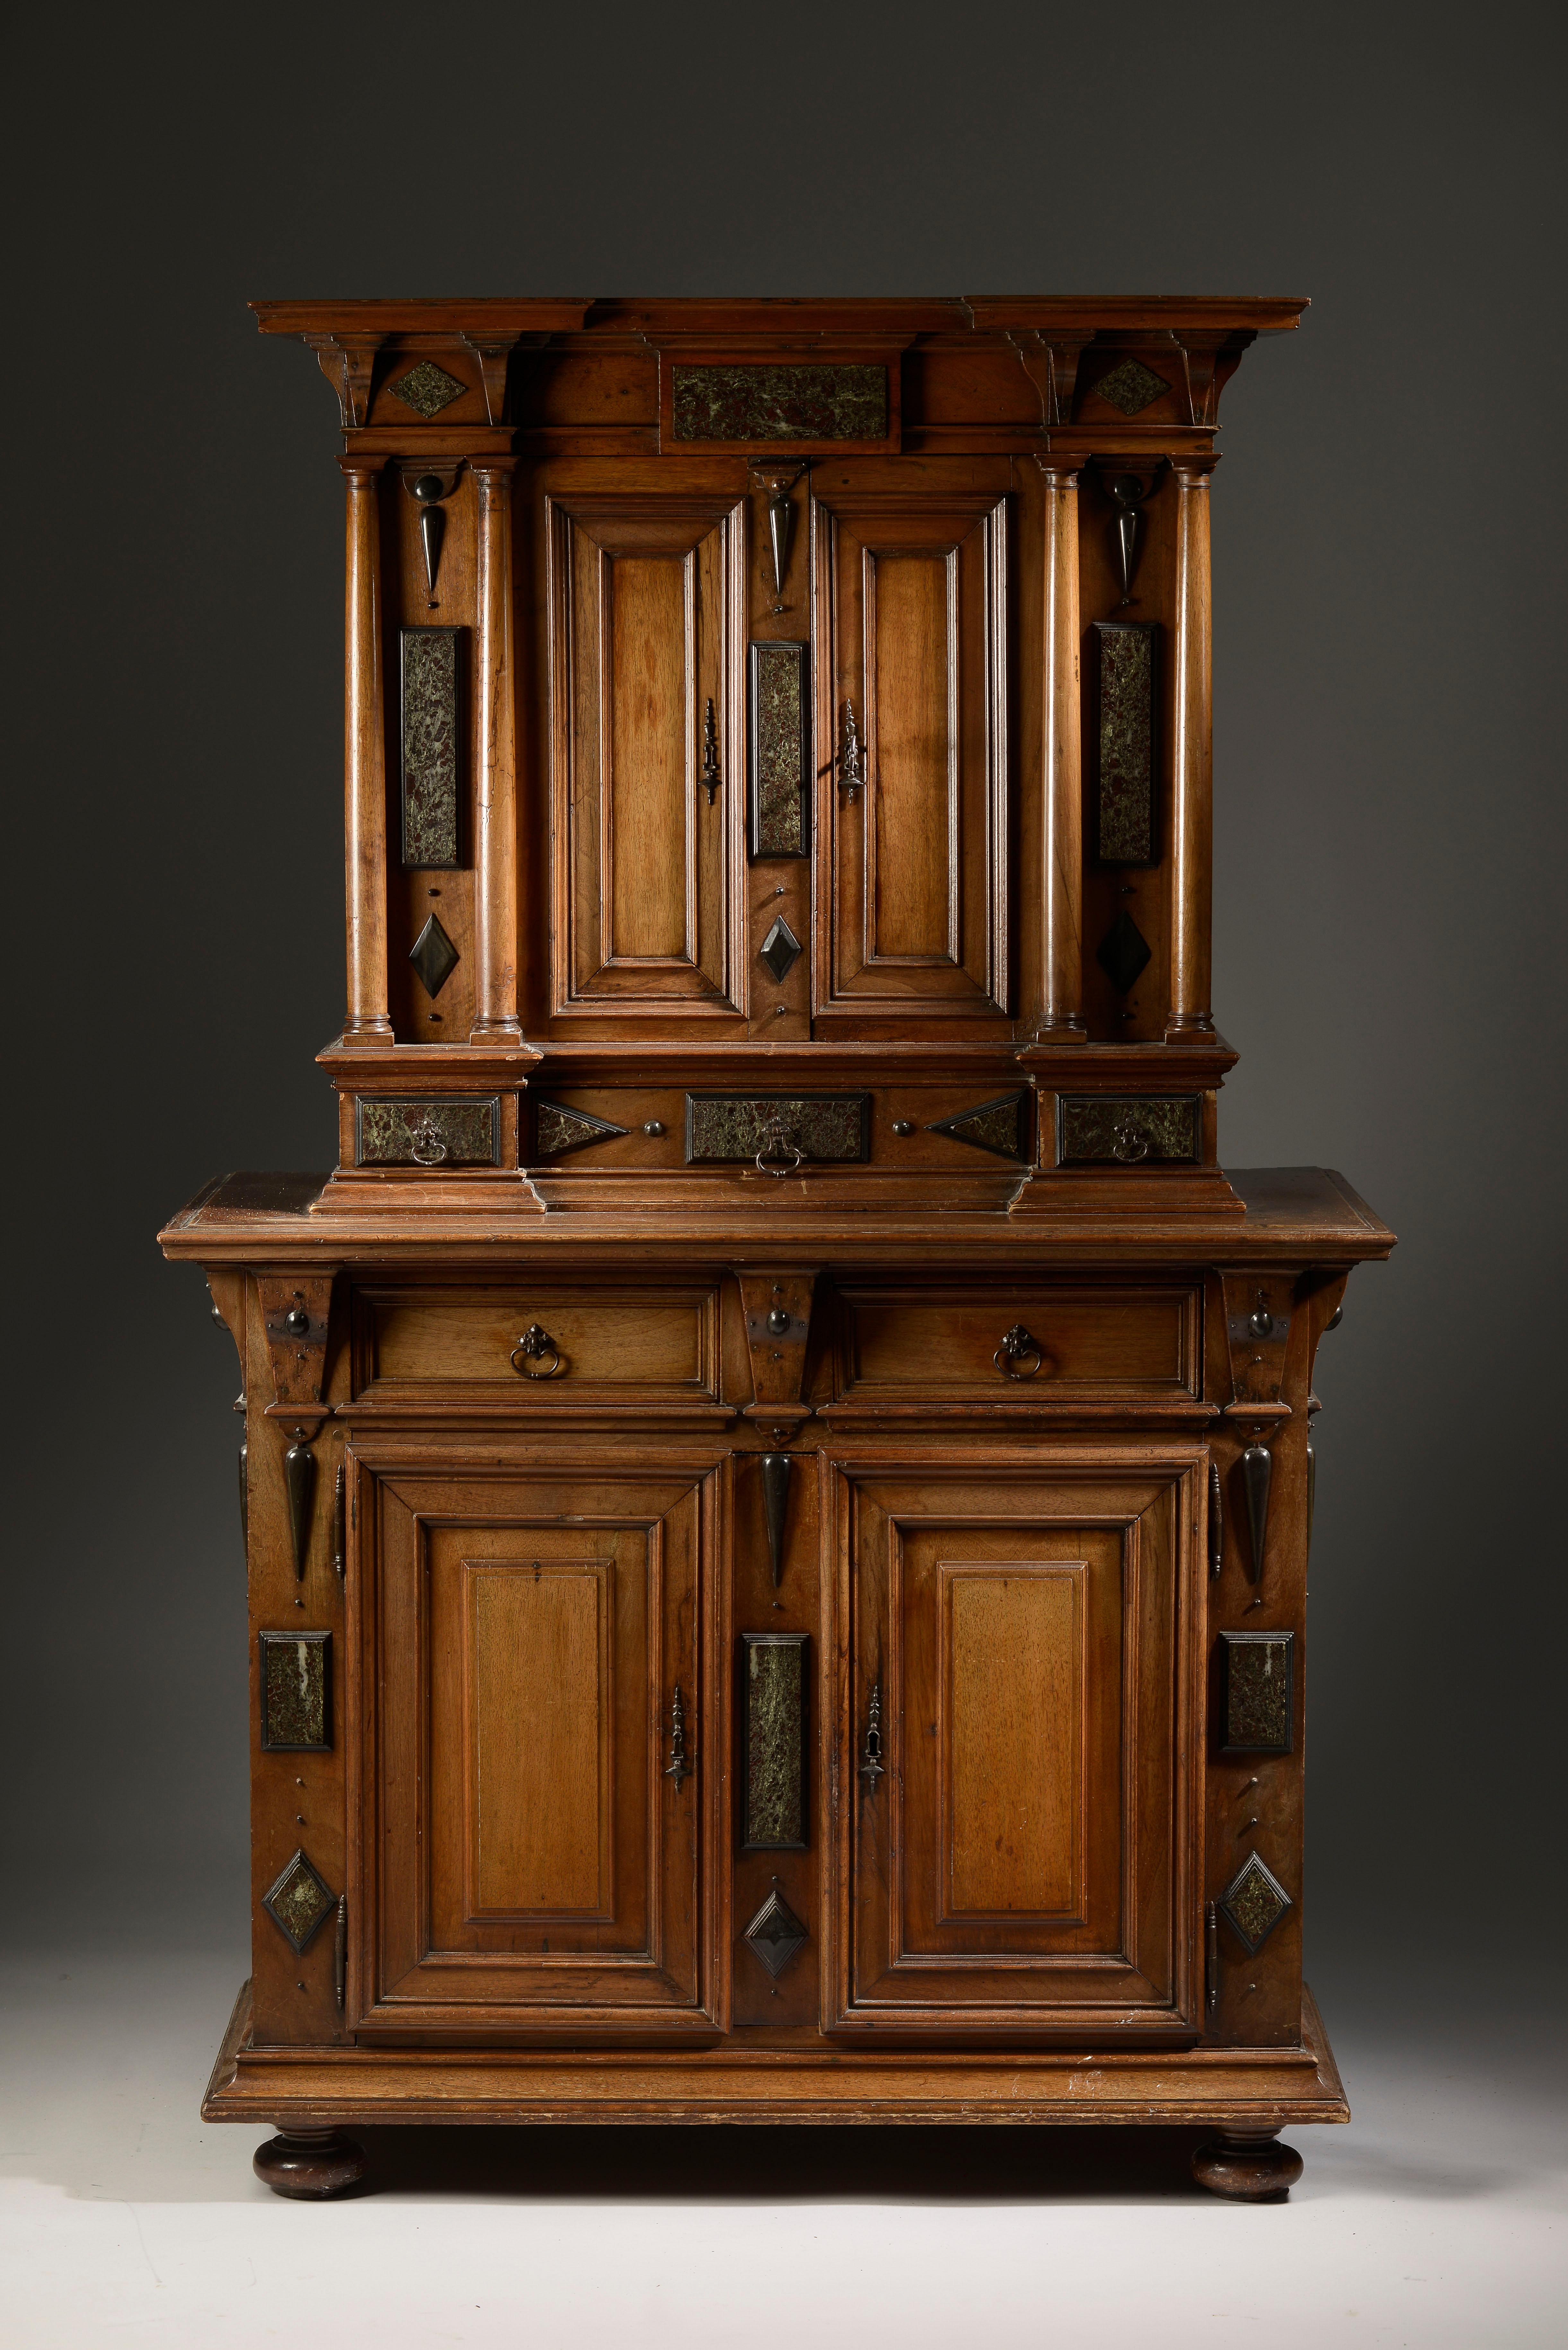 Small cabinet by L’ecole De Fontainebleau Incrusted with marble tablets

Origin : VAL-DE-LOIRE, France
Period : 16th century

Measures: Height : 170 cm
Width : 110cm
Depth : 50cm

Blond walnut wood
Good state of conservation


Thanks to